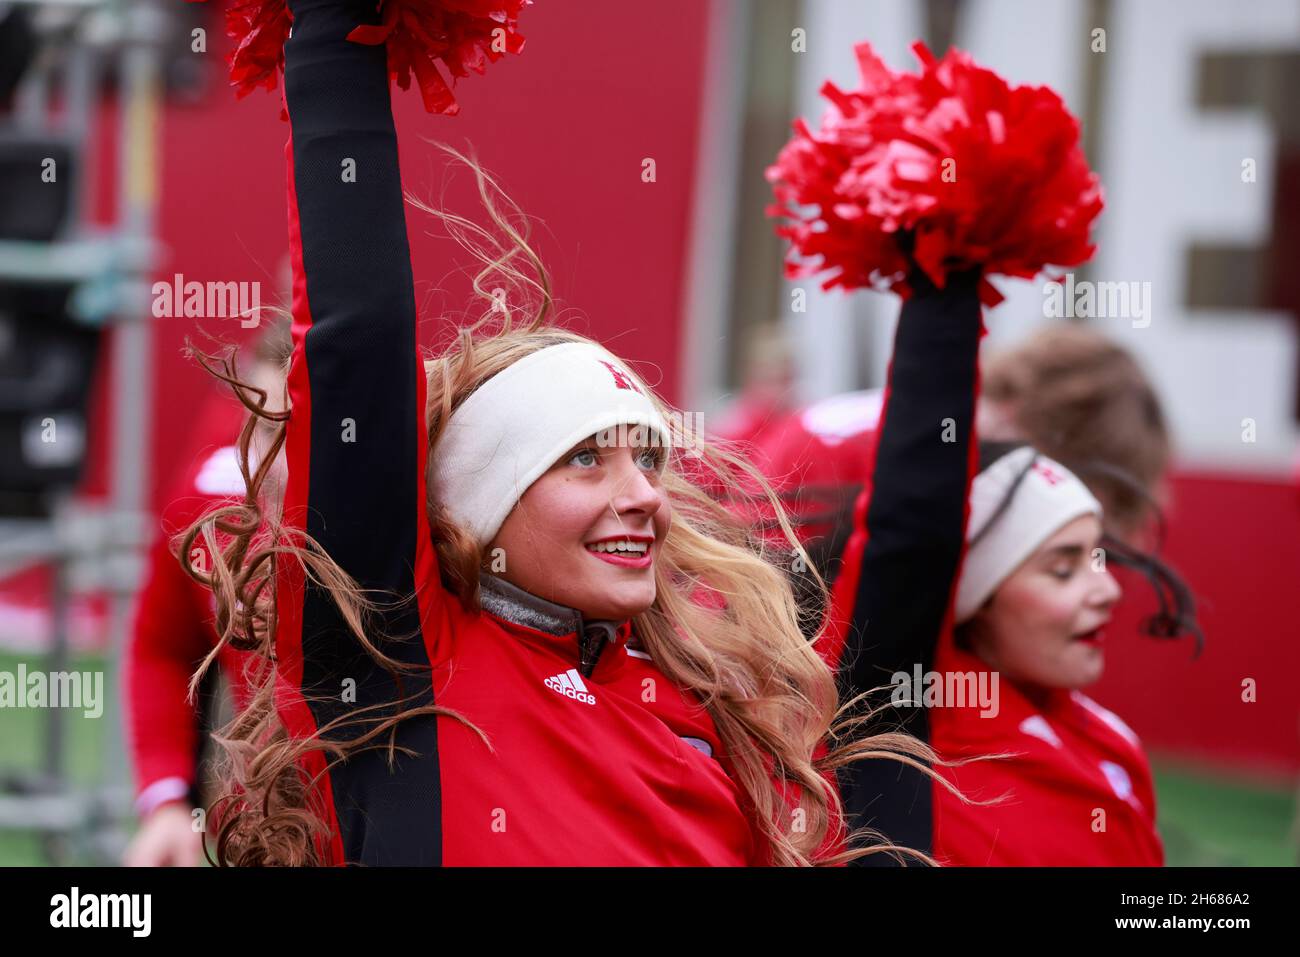 BLOOMINGTON, UNITED STATES - 2021/11/13: Rutgers cheerleaders cheer against Indiana University during an NCAA football game on November 13, 2021 at Memorial Stadium in Bloomington, Ind. Rutgers was leading IU 17-3 at halftime. Stock Photo